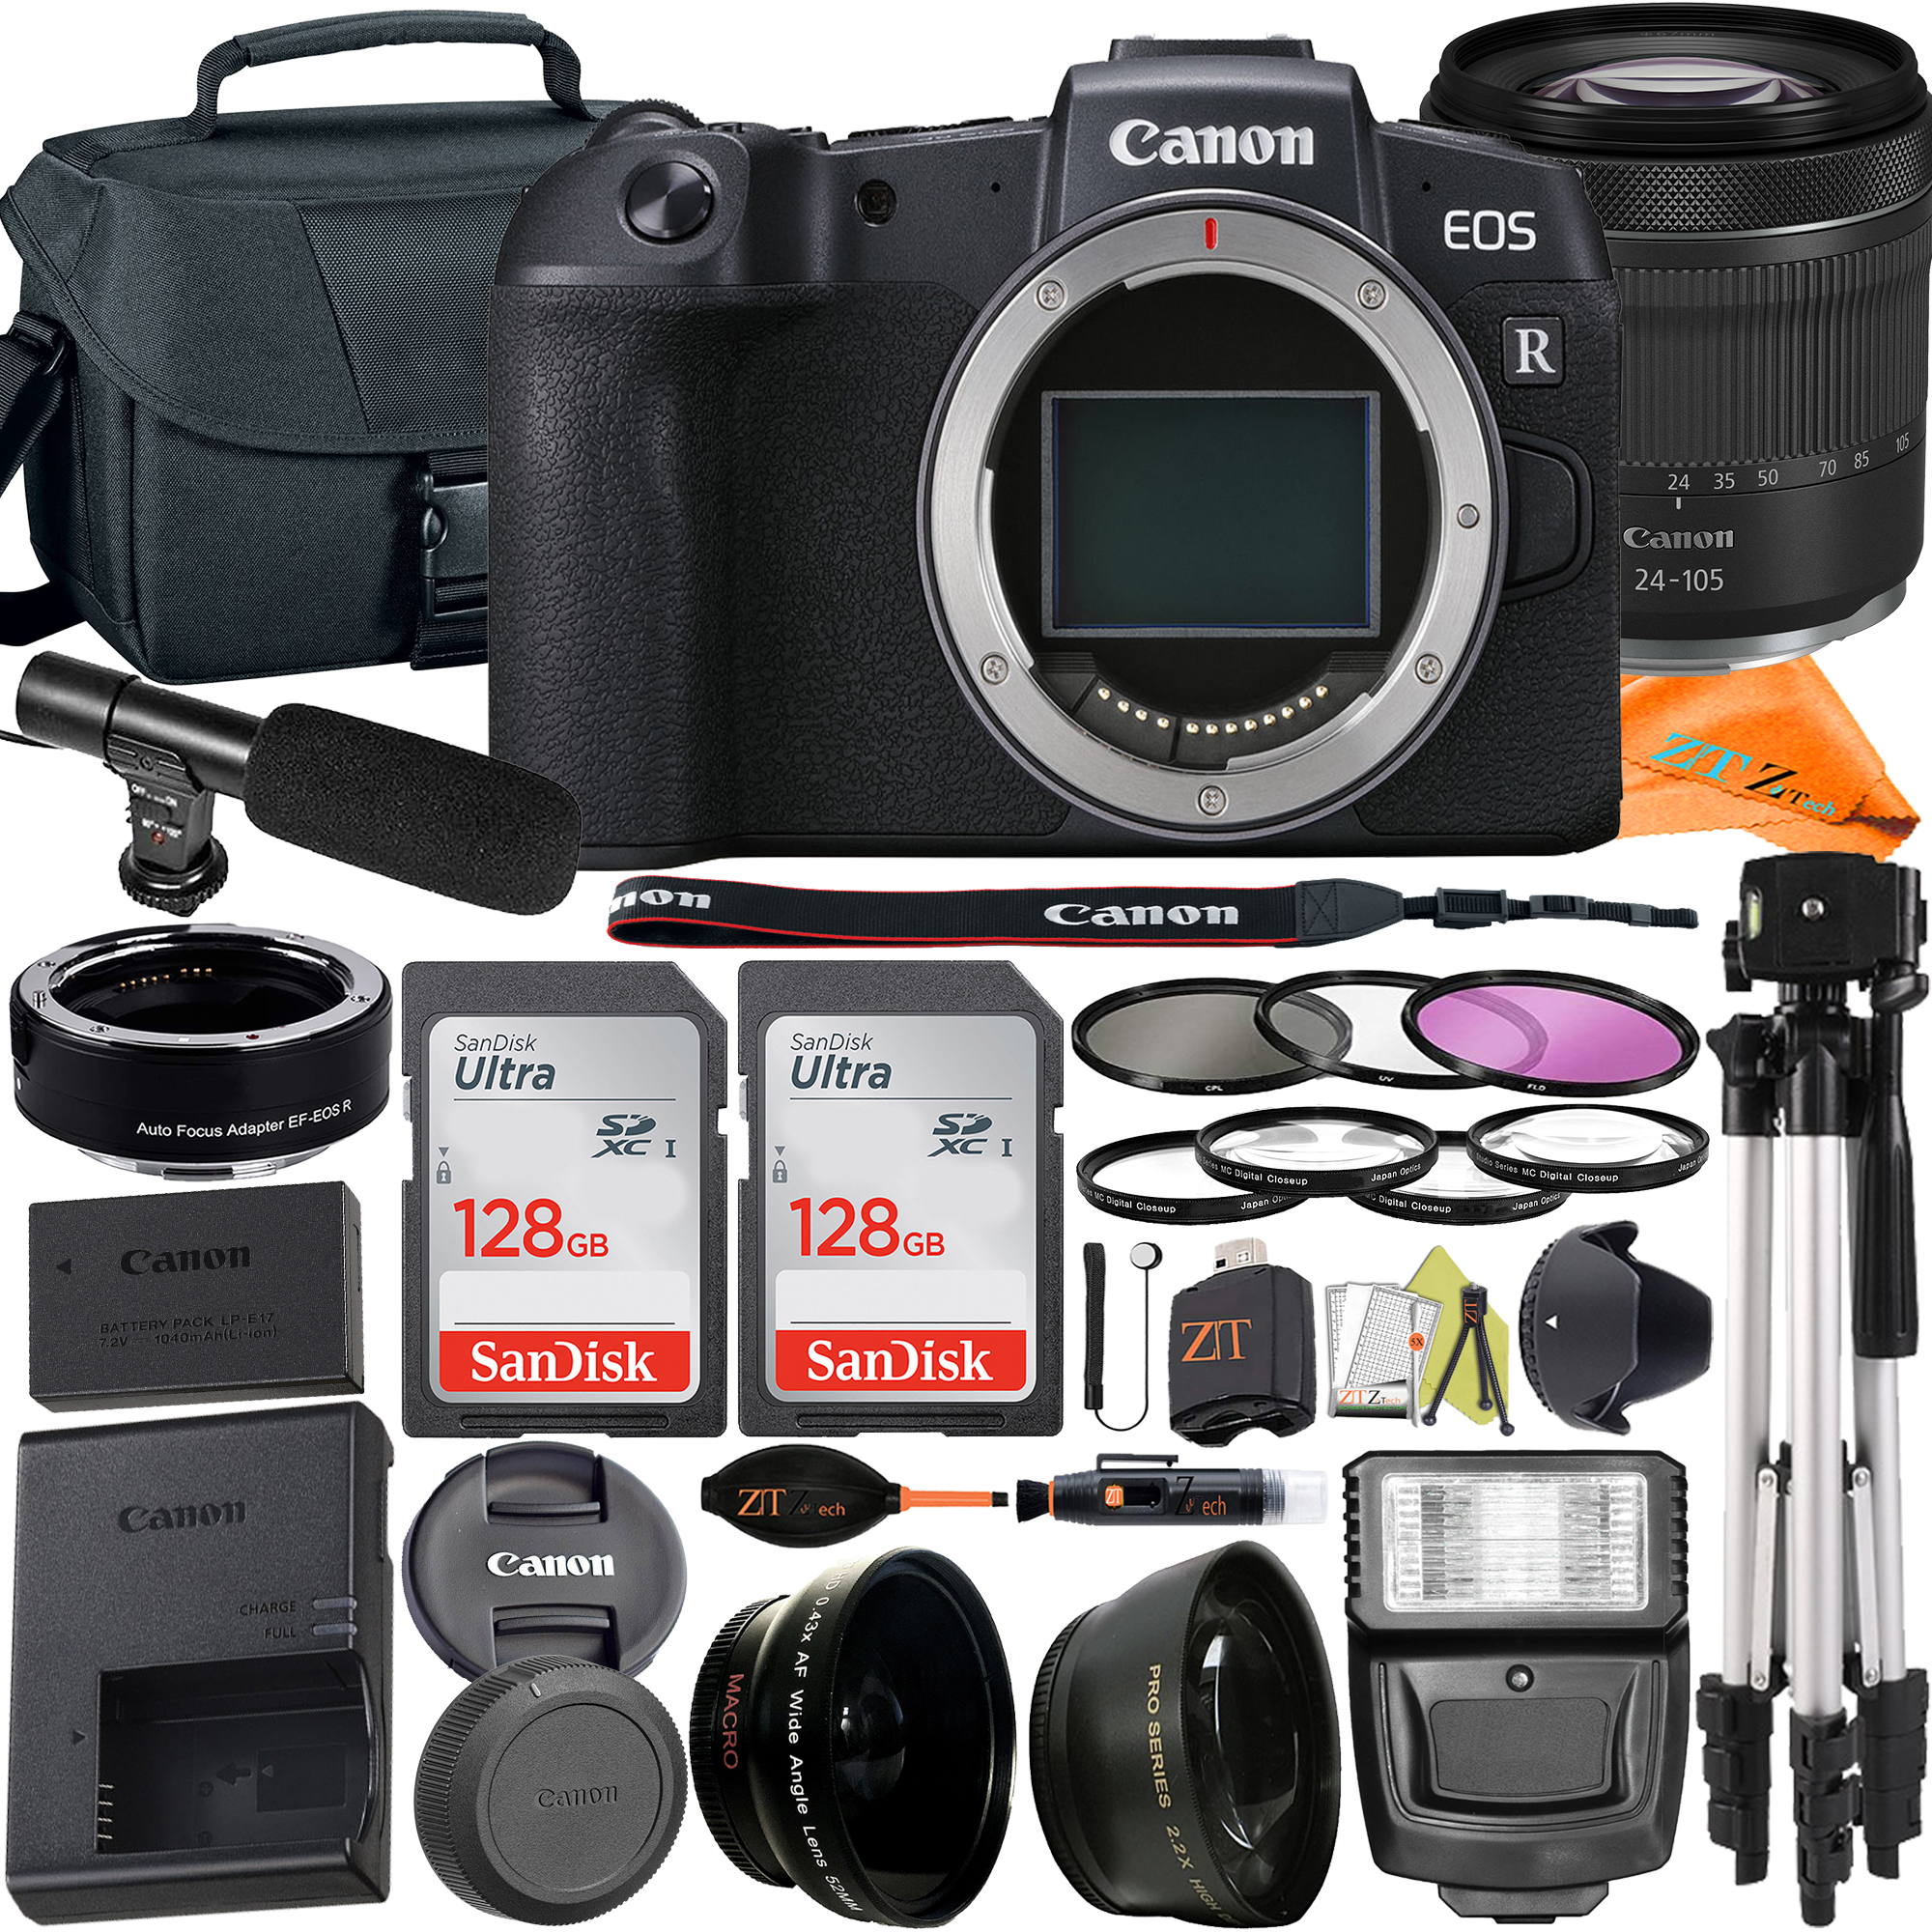 Canon EOS RP Mirrorless Camera with RF24-105mm Lens + Mount Adapter + 2Pack SanDisk 128GB + Case + ZeeTech Accessory